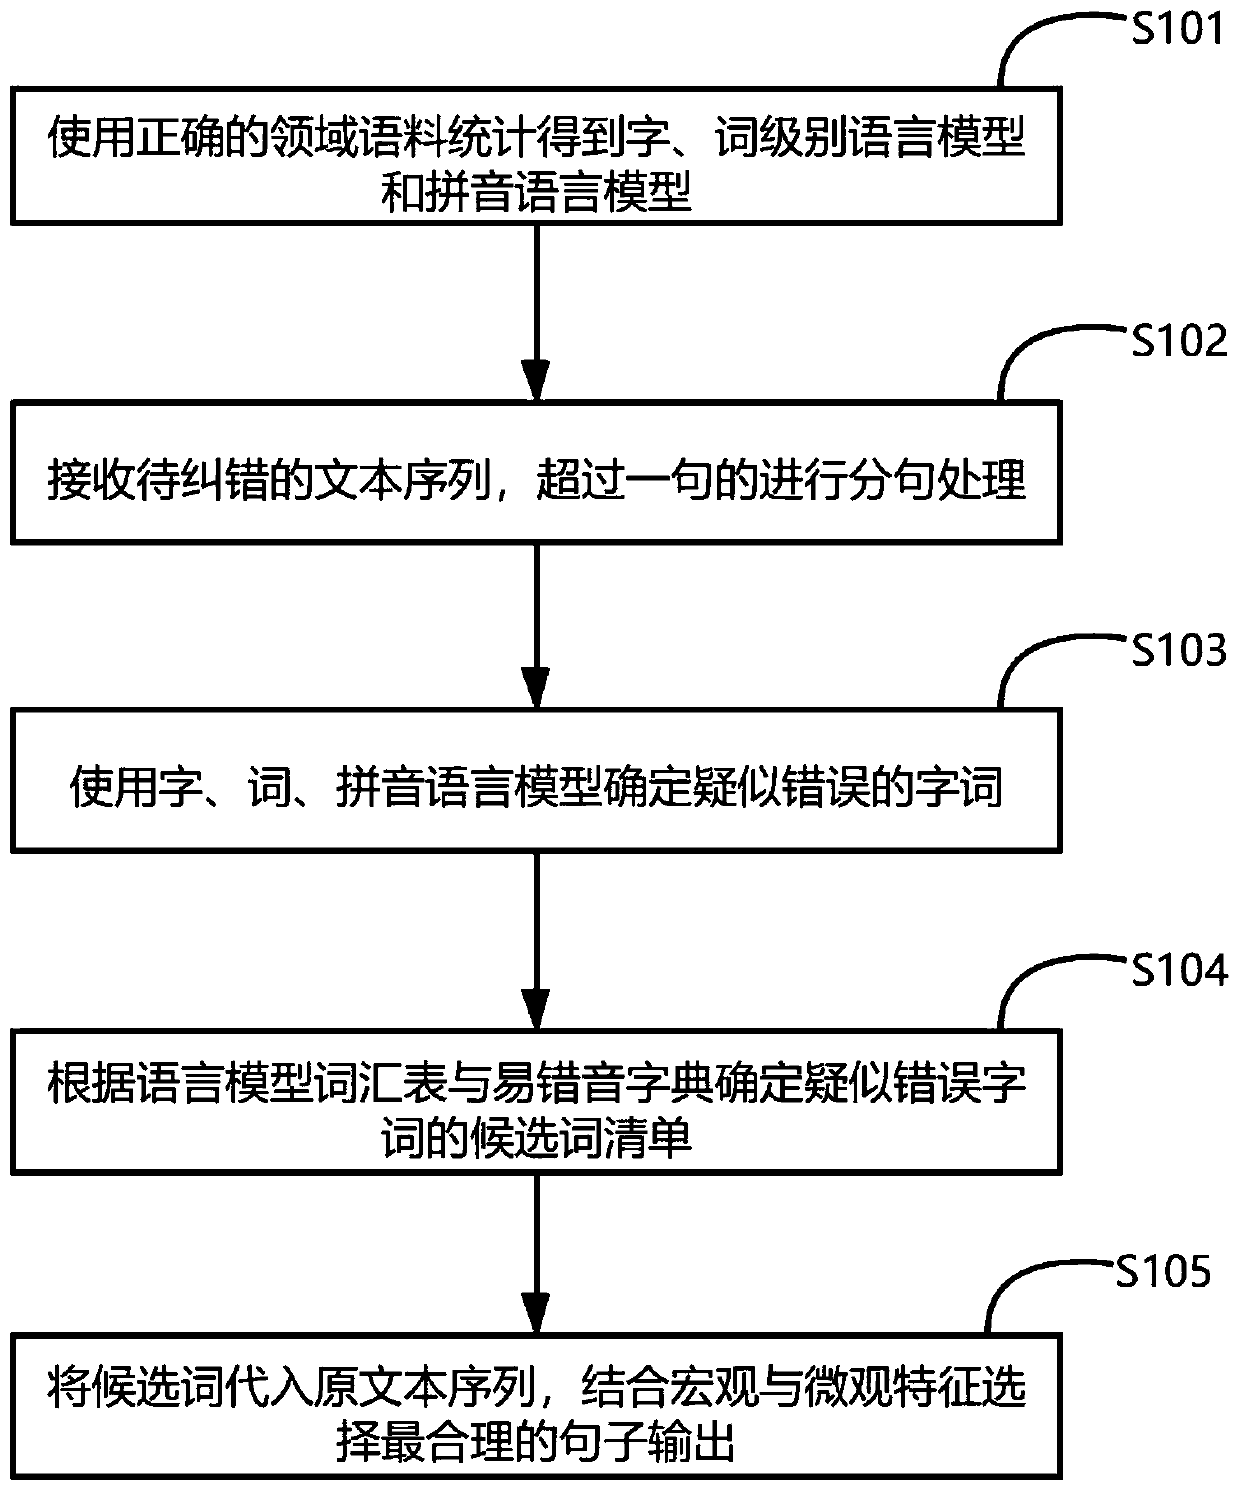 Voice recognition text error correction method in specific field